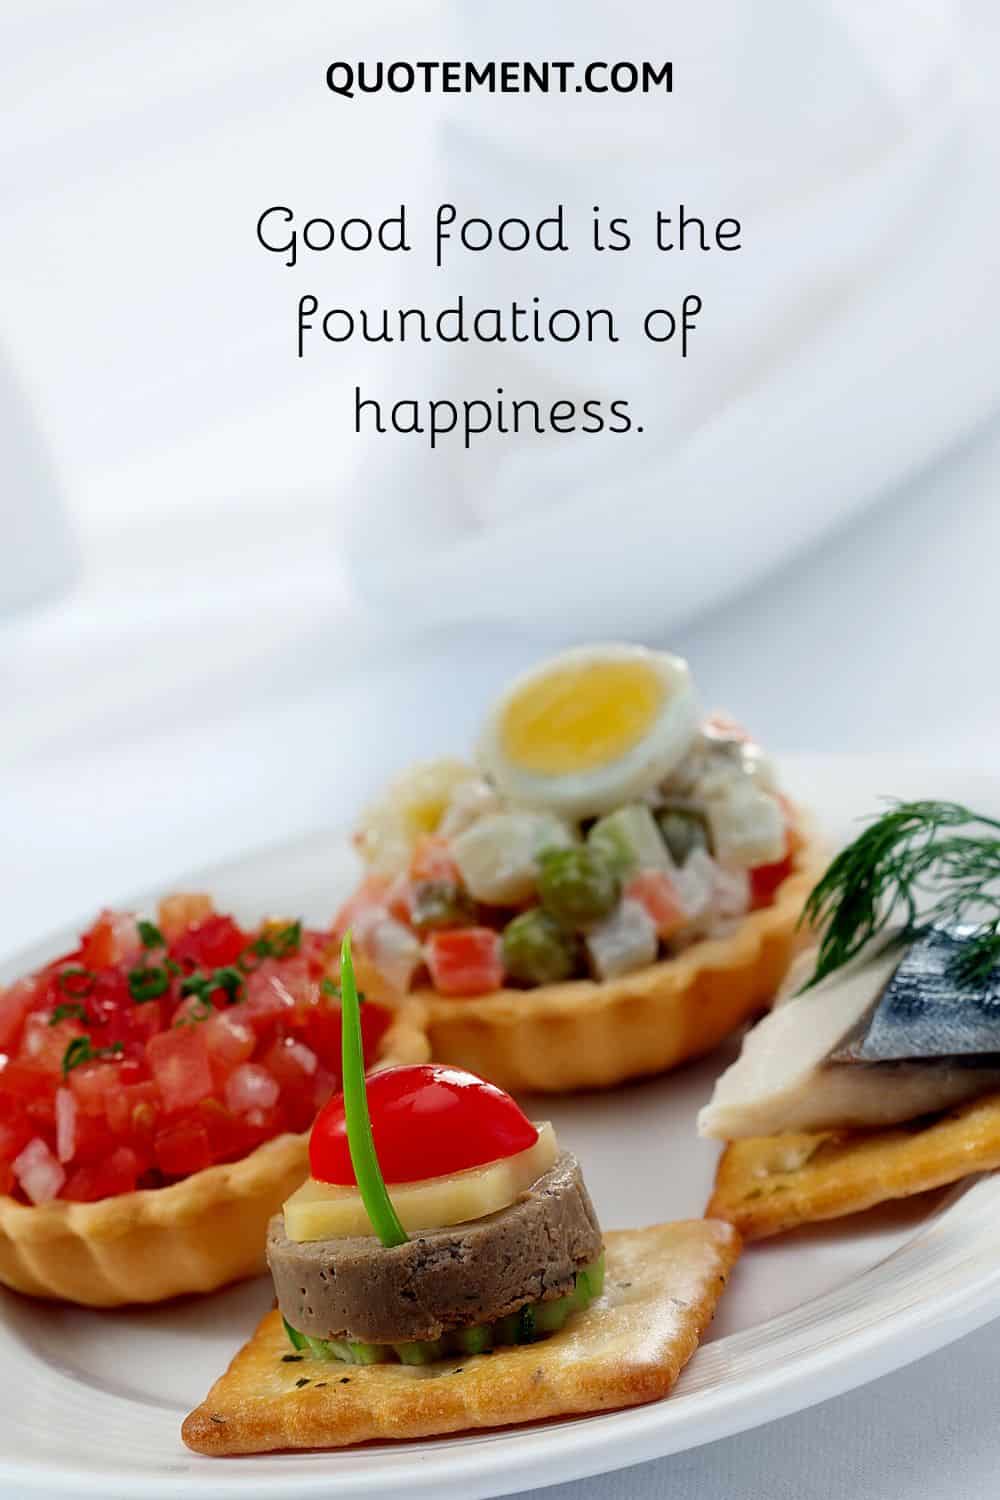 Good food is the foundation of happiness.